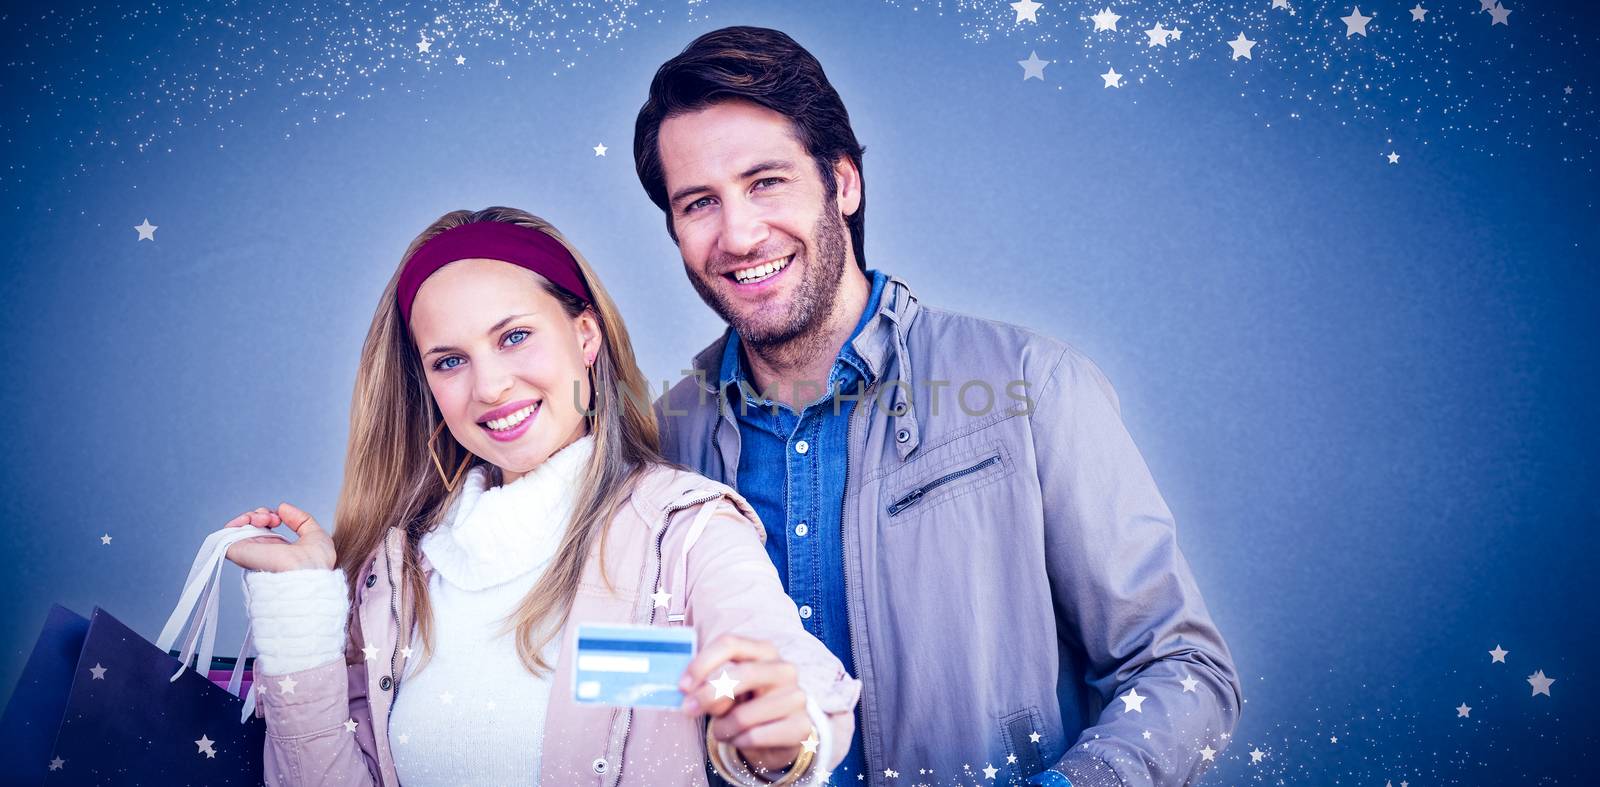 Smiling couple with shopping bags showing credit card against blue background